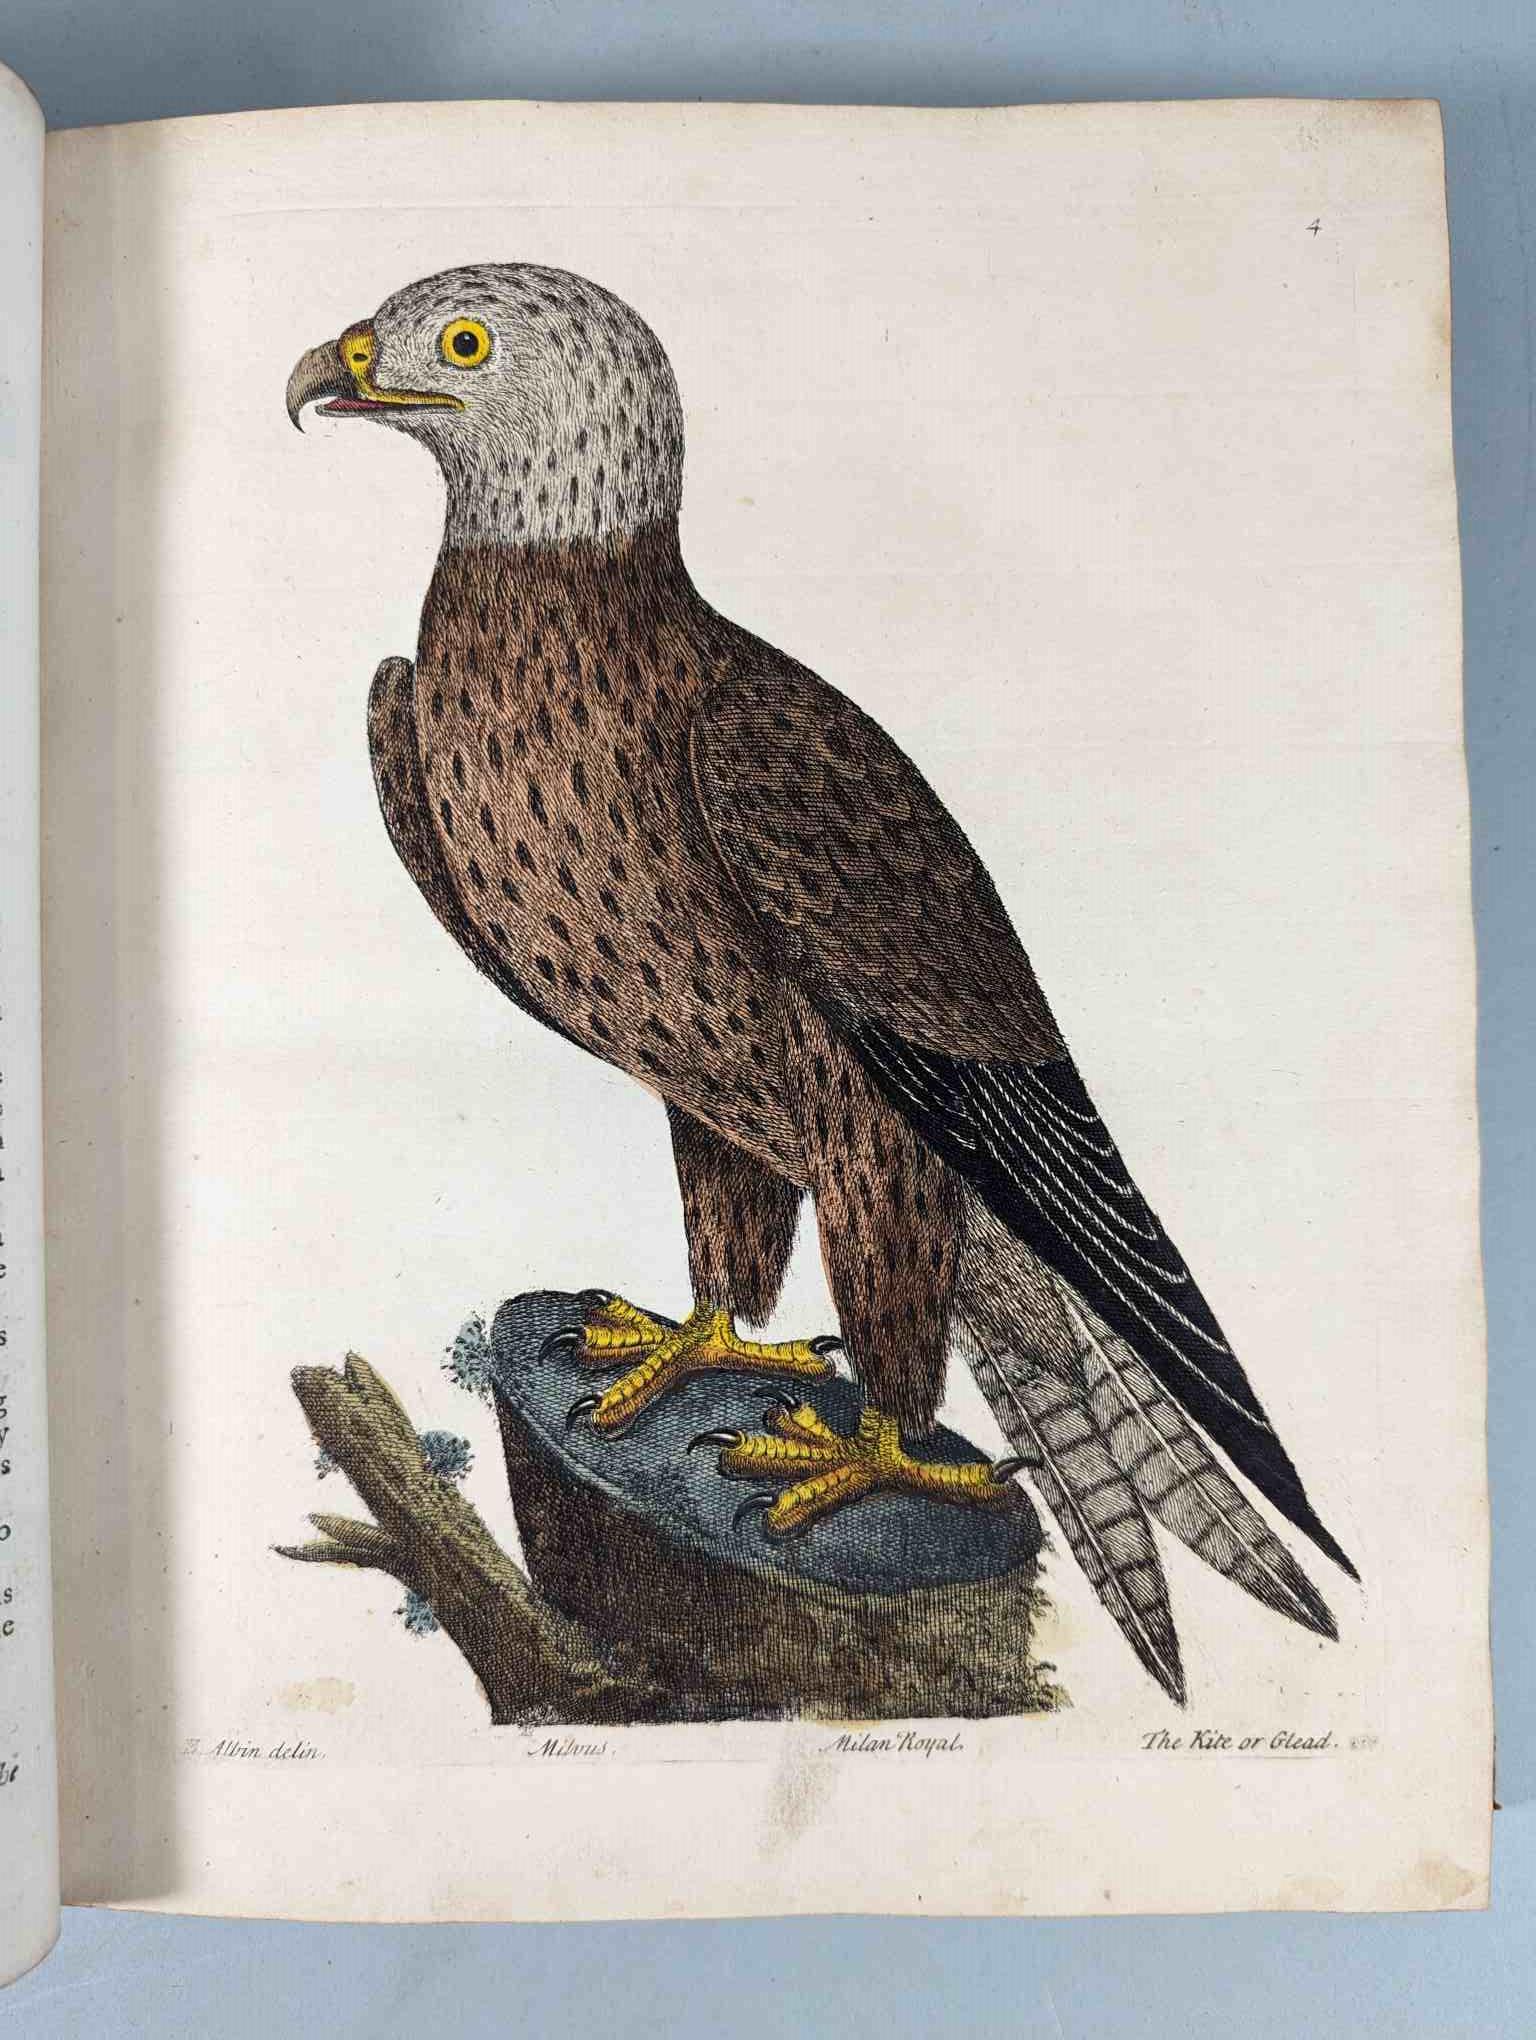 ALBIN, Eleazar. A Natural History of Birds, to which are added, Notes and Observations by W. - Image 11 of 208